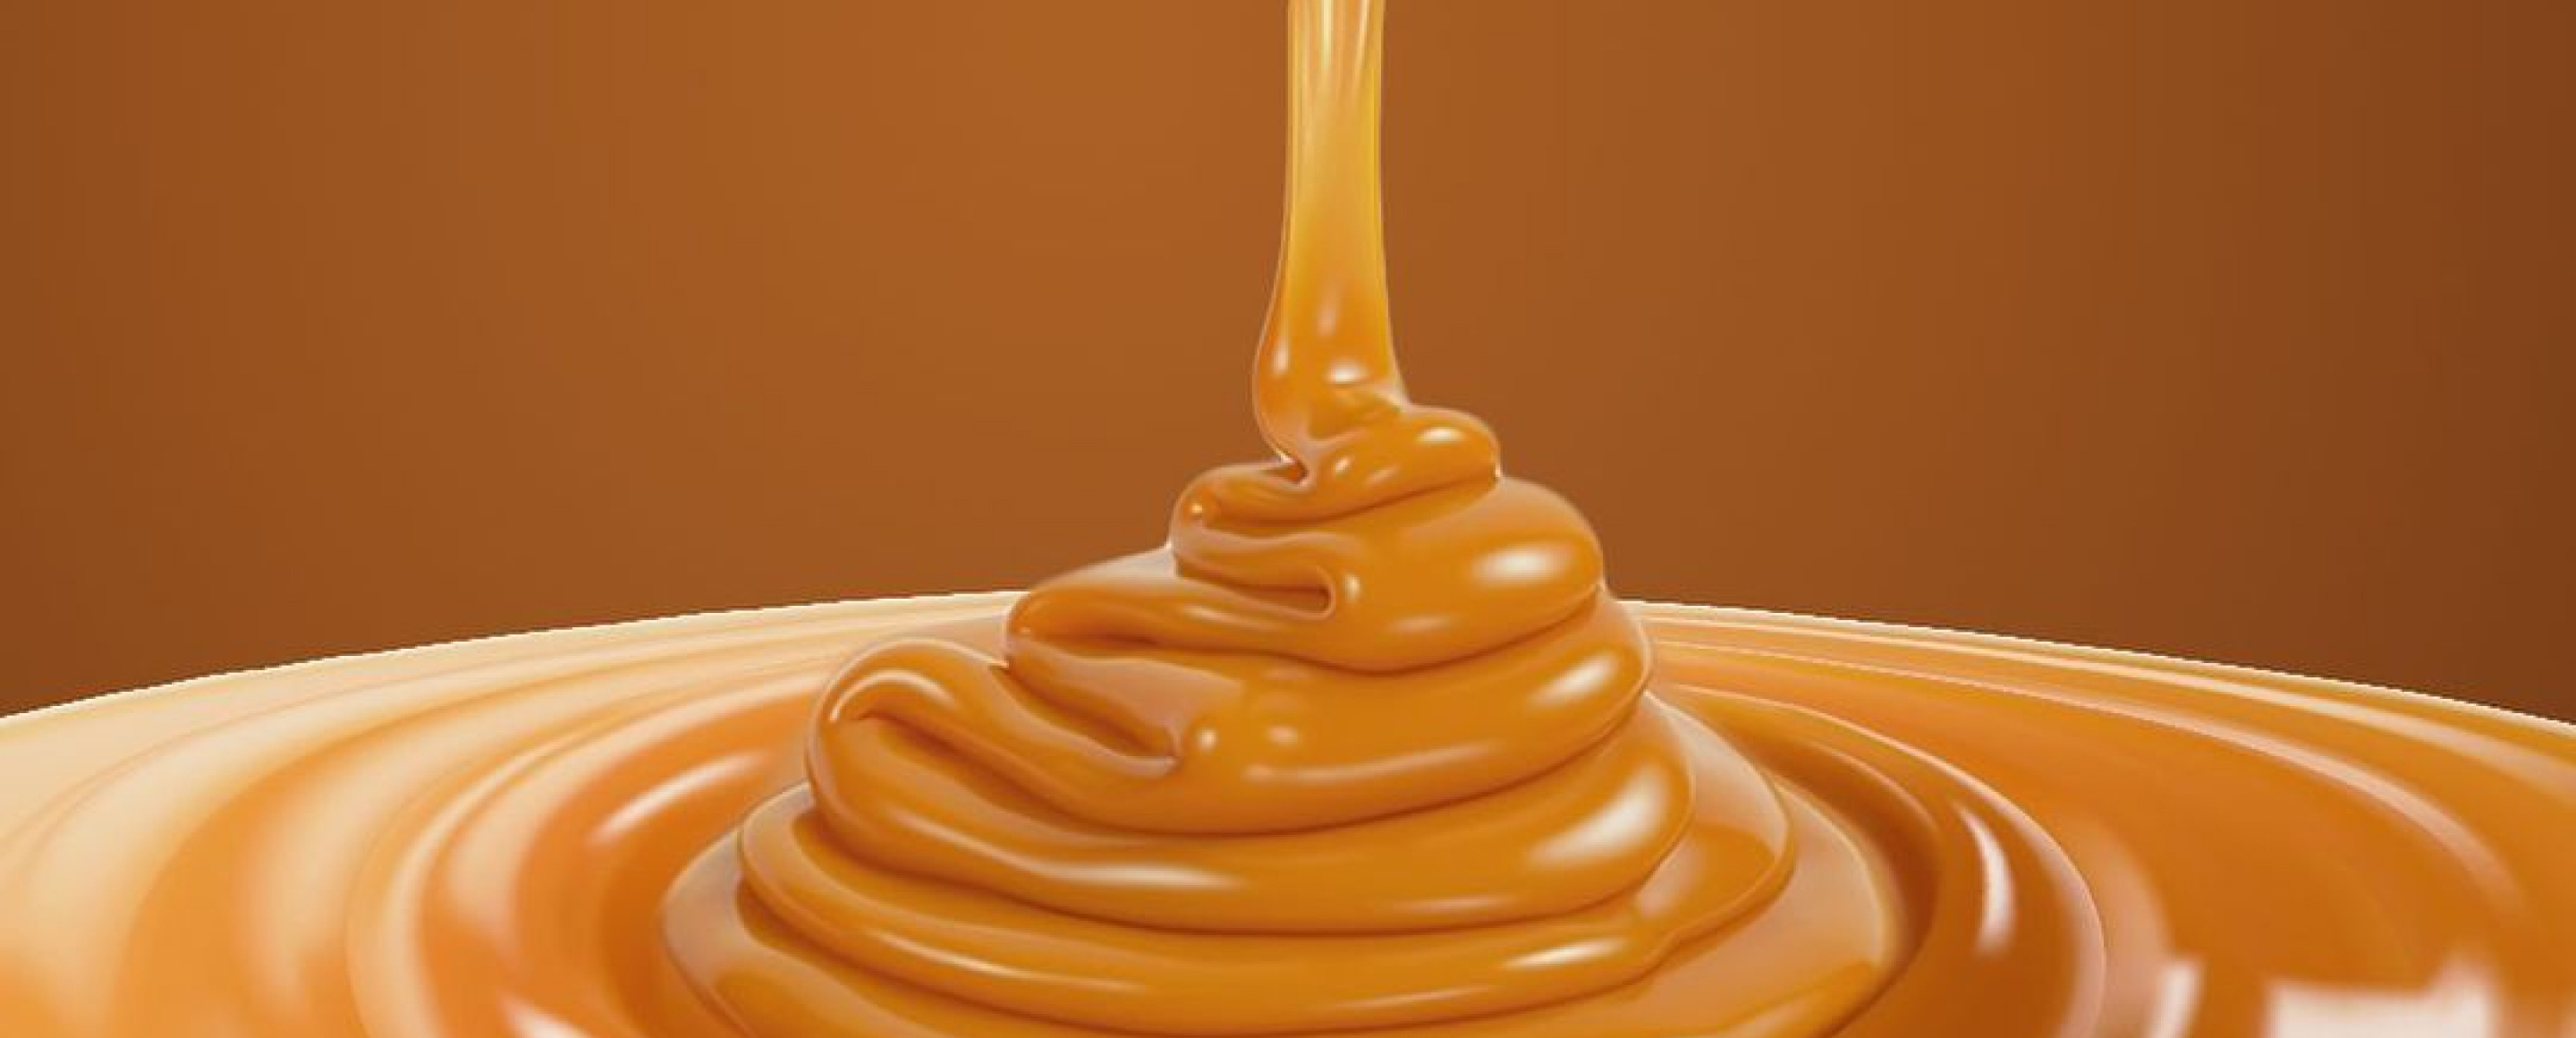 Caramel being poured into a puddle on brown background